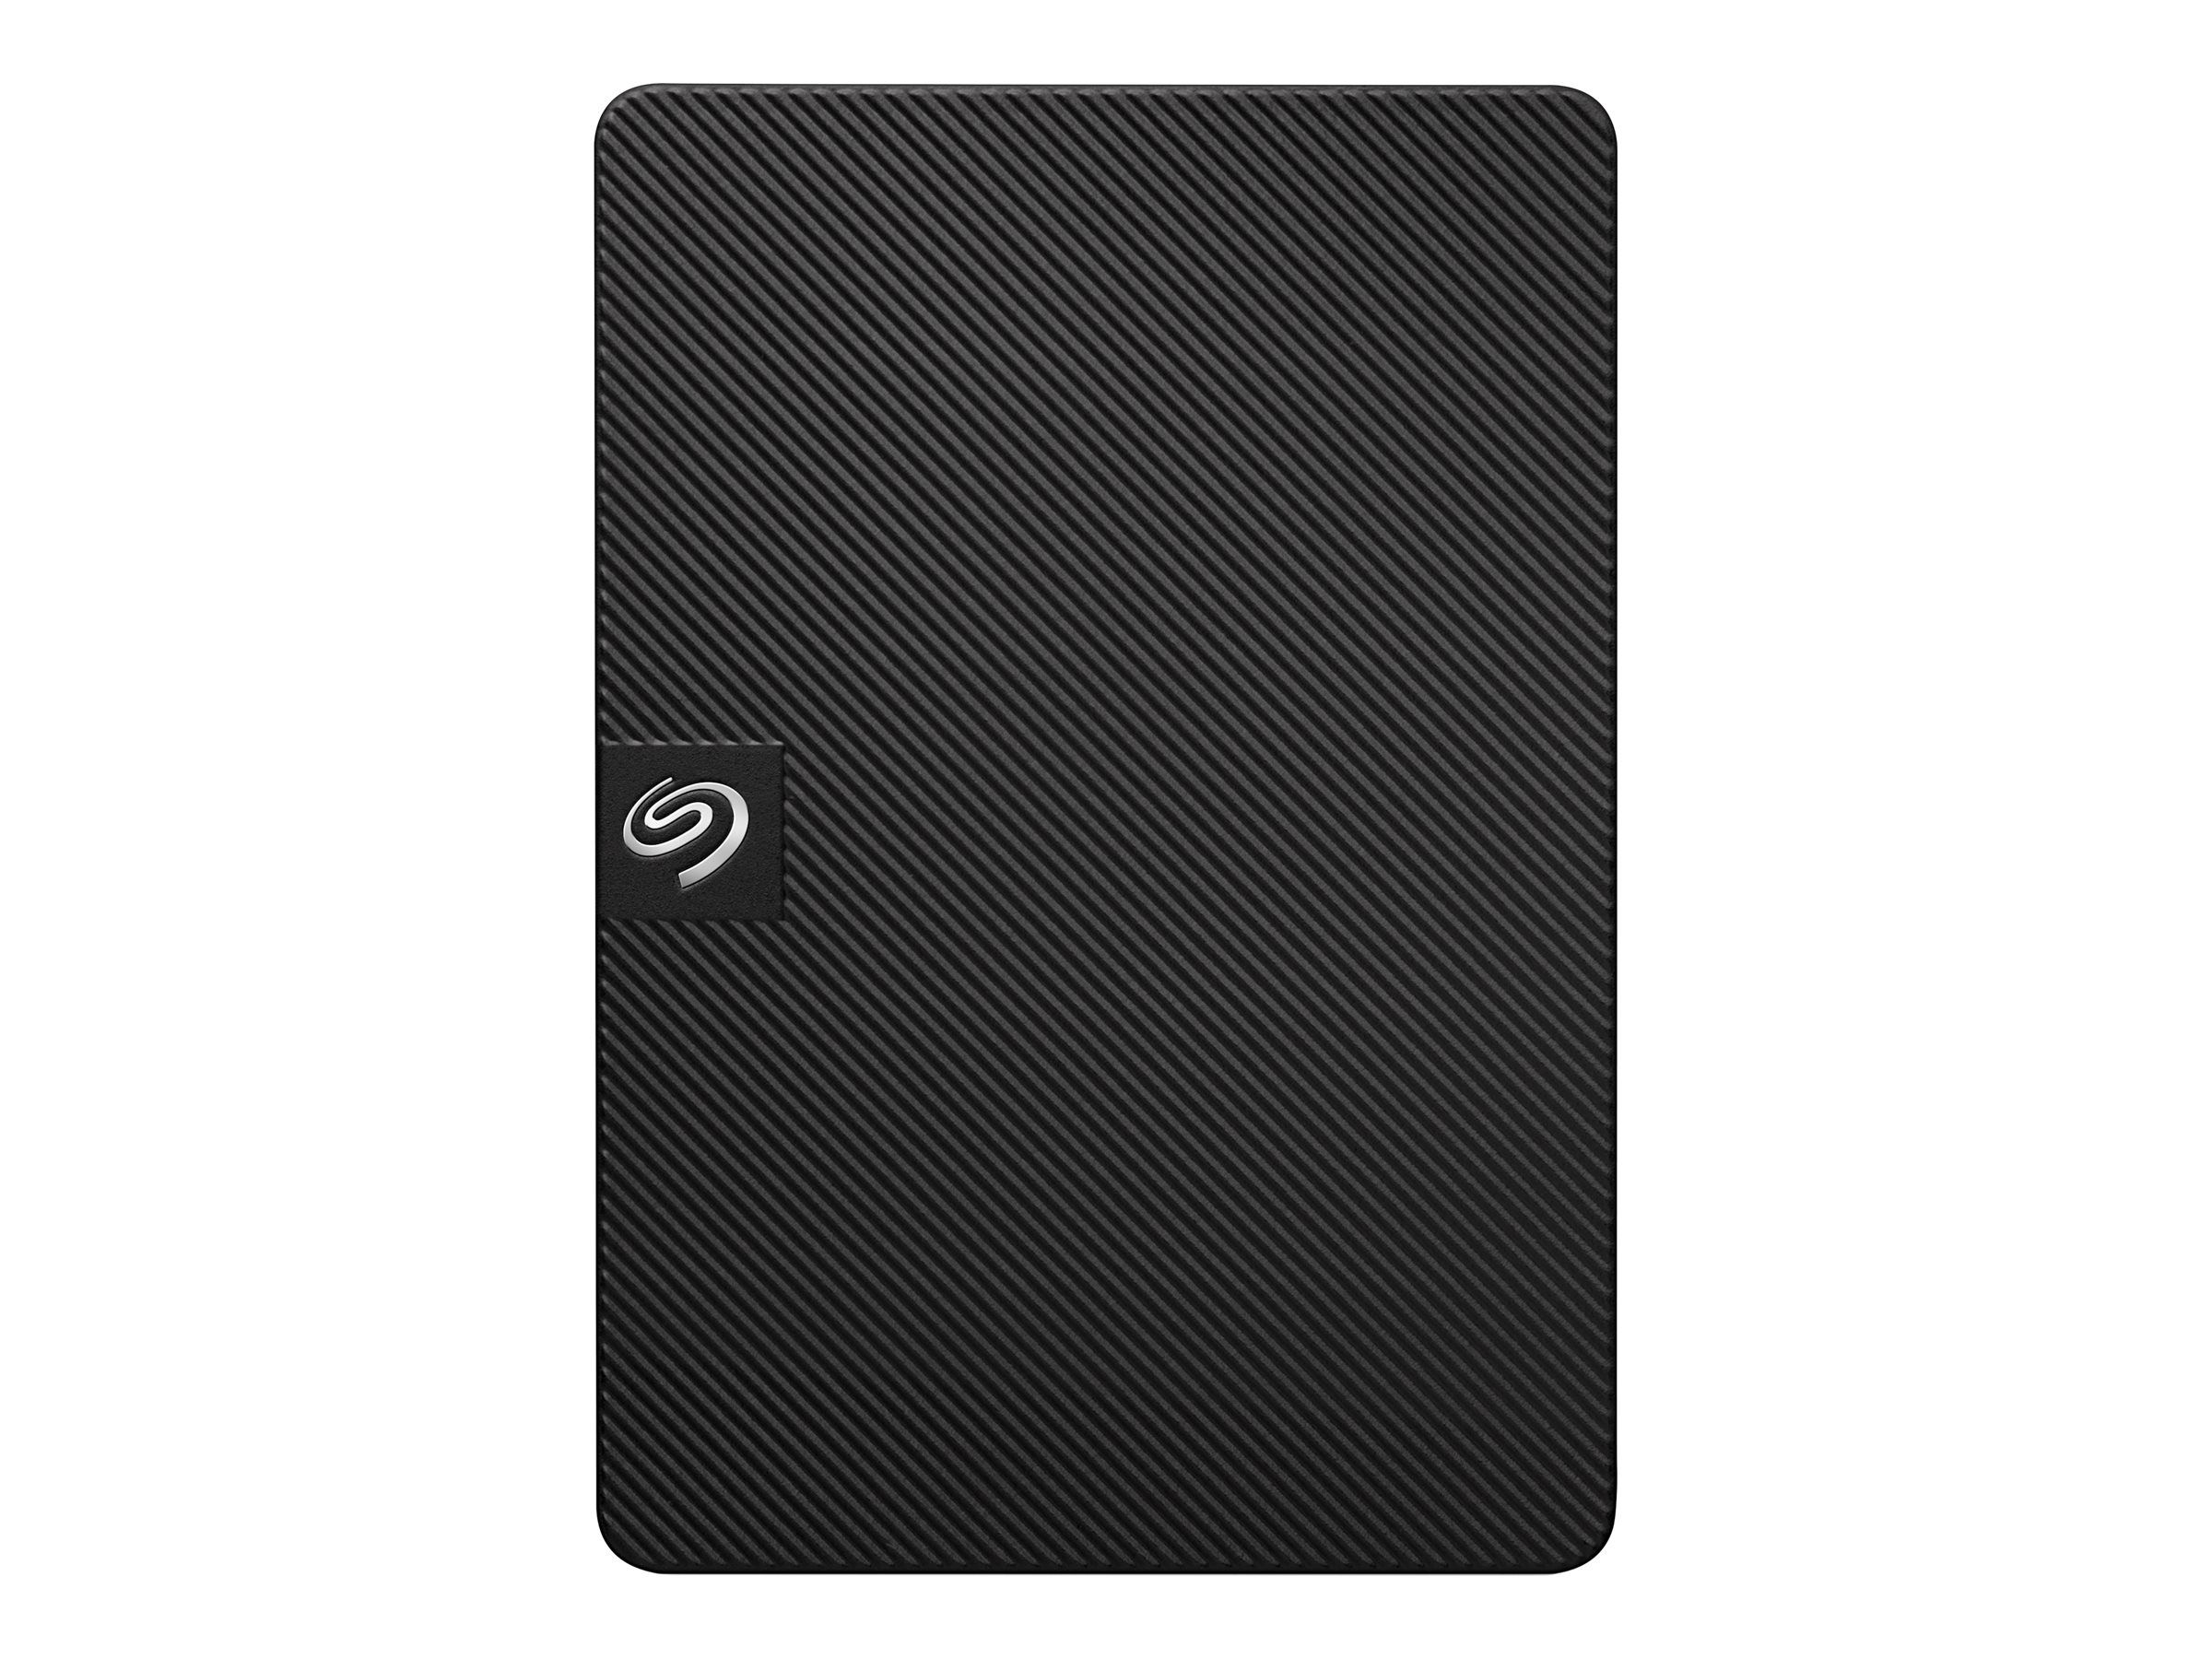 TB | Festplatte PS4 for STGD2000200 Seagate extern - 2 Game Drive (tragbar) 656611551 - -